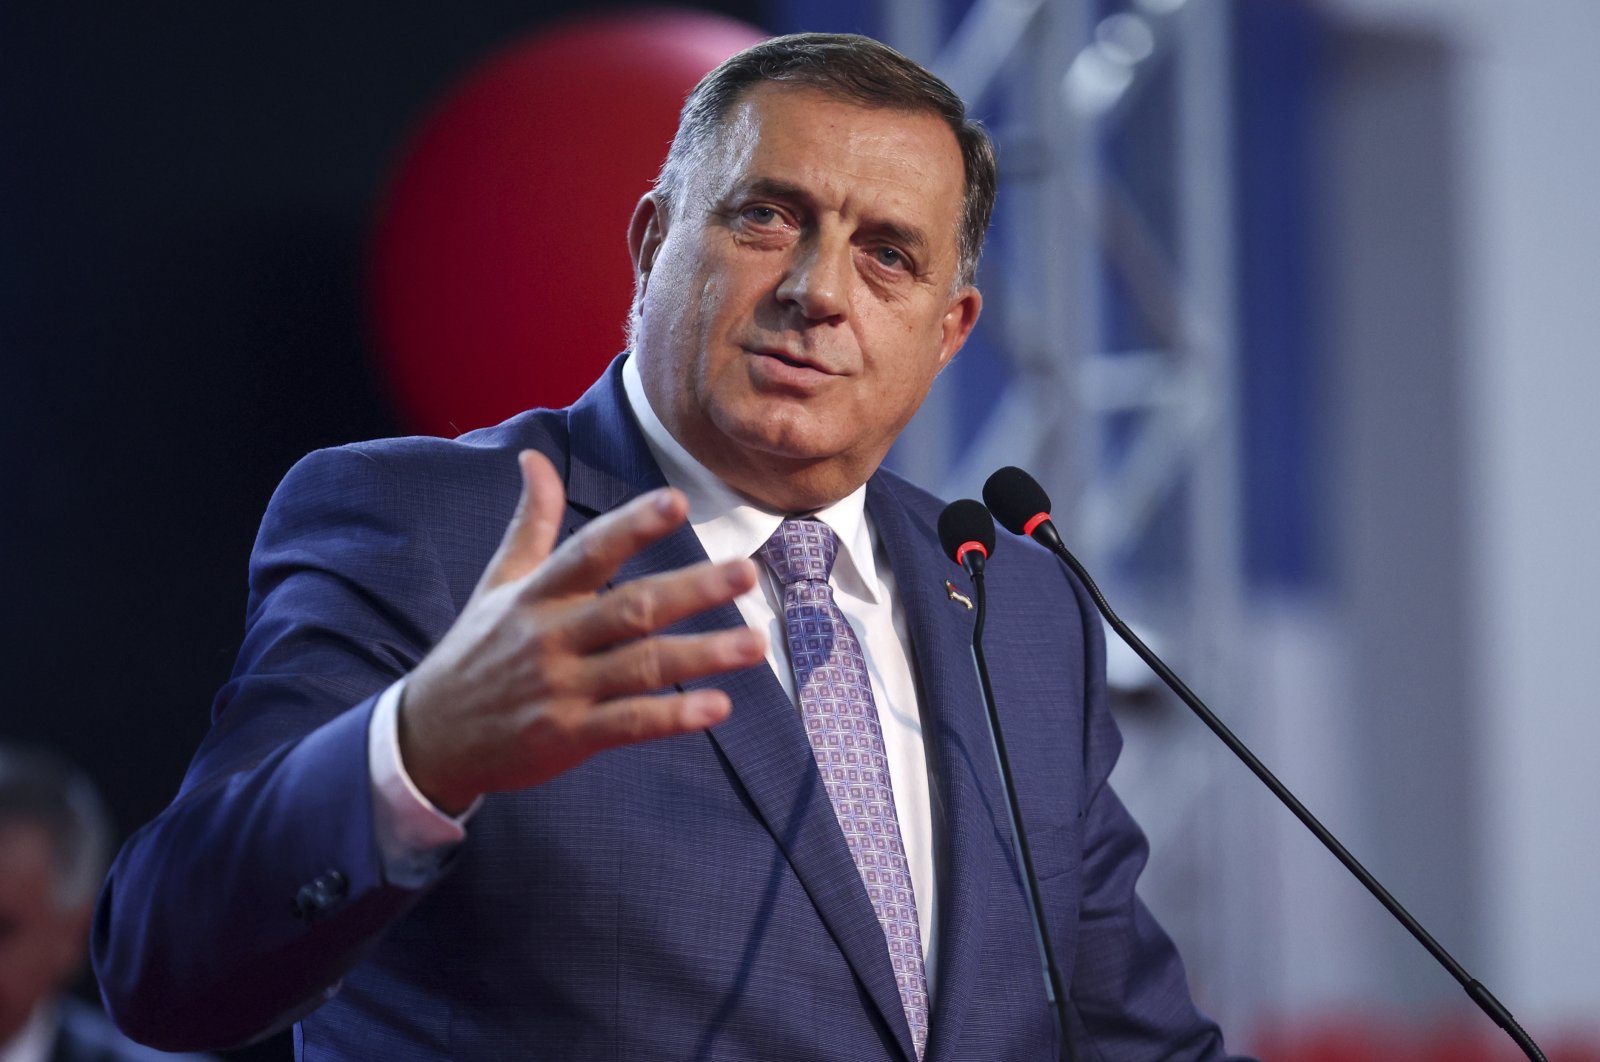 Serb member of the Bosnian Presidency Milorad Dodik, who is running for the president of Republika Srpska, speaks during campaign rally of the Alliance of Independent Social Democrats (SNSD), Istocno Sarajevo, Bosnia-Herzegovina, Sept. 27, 2022.